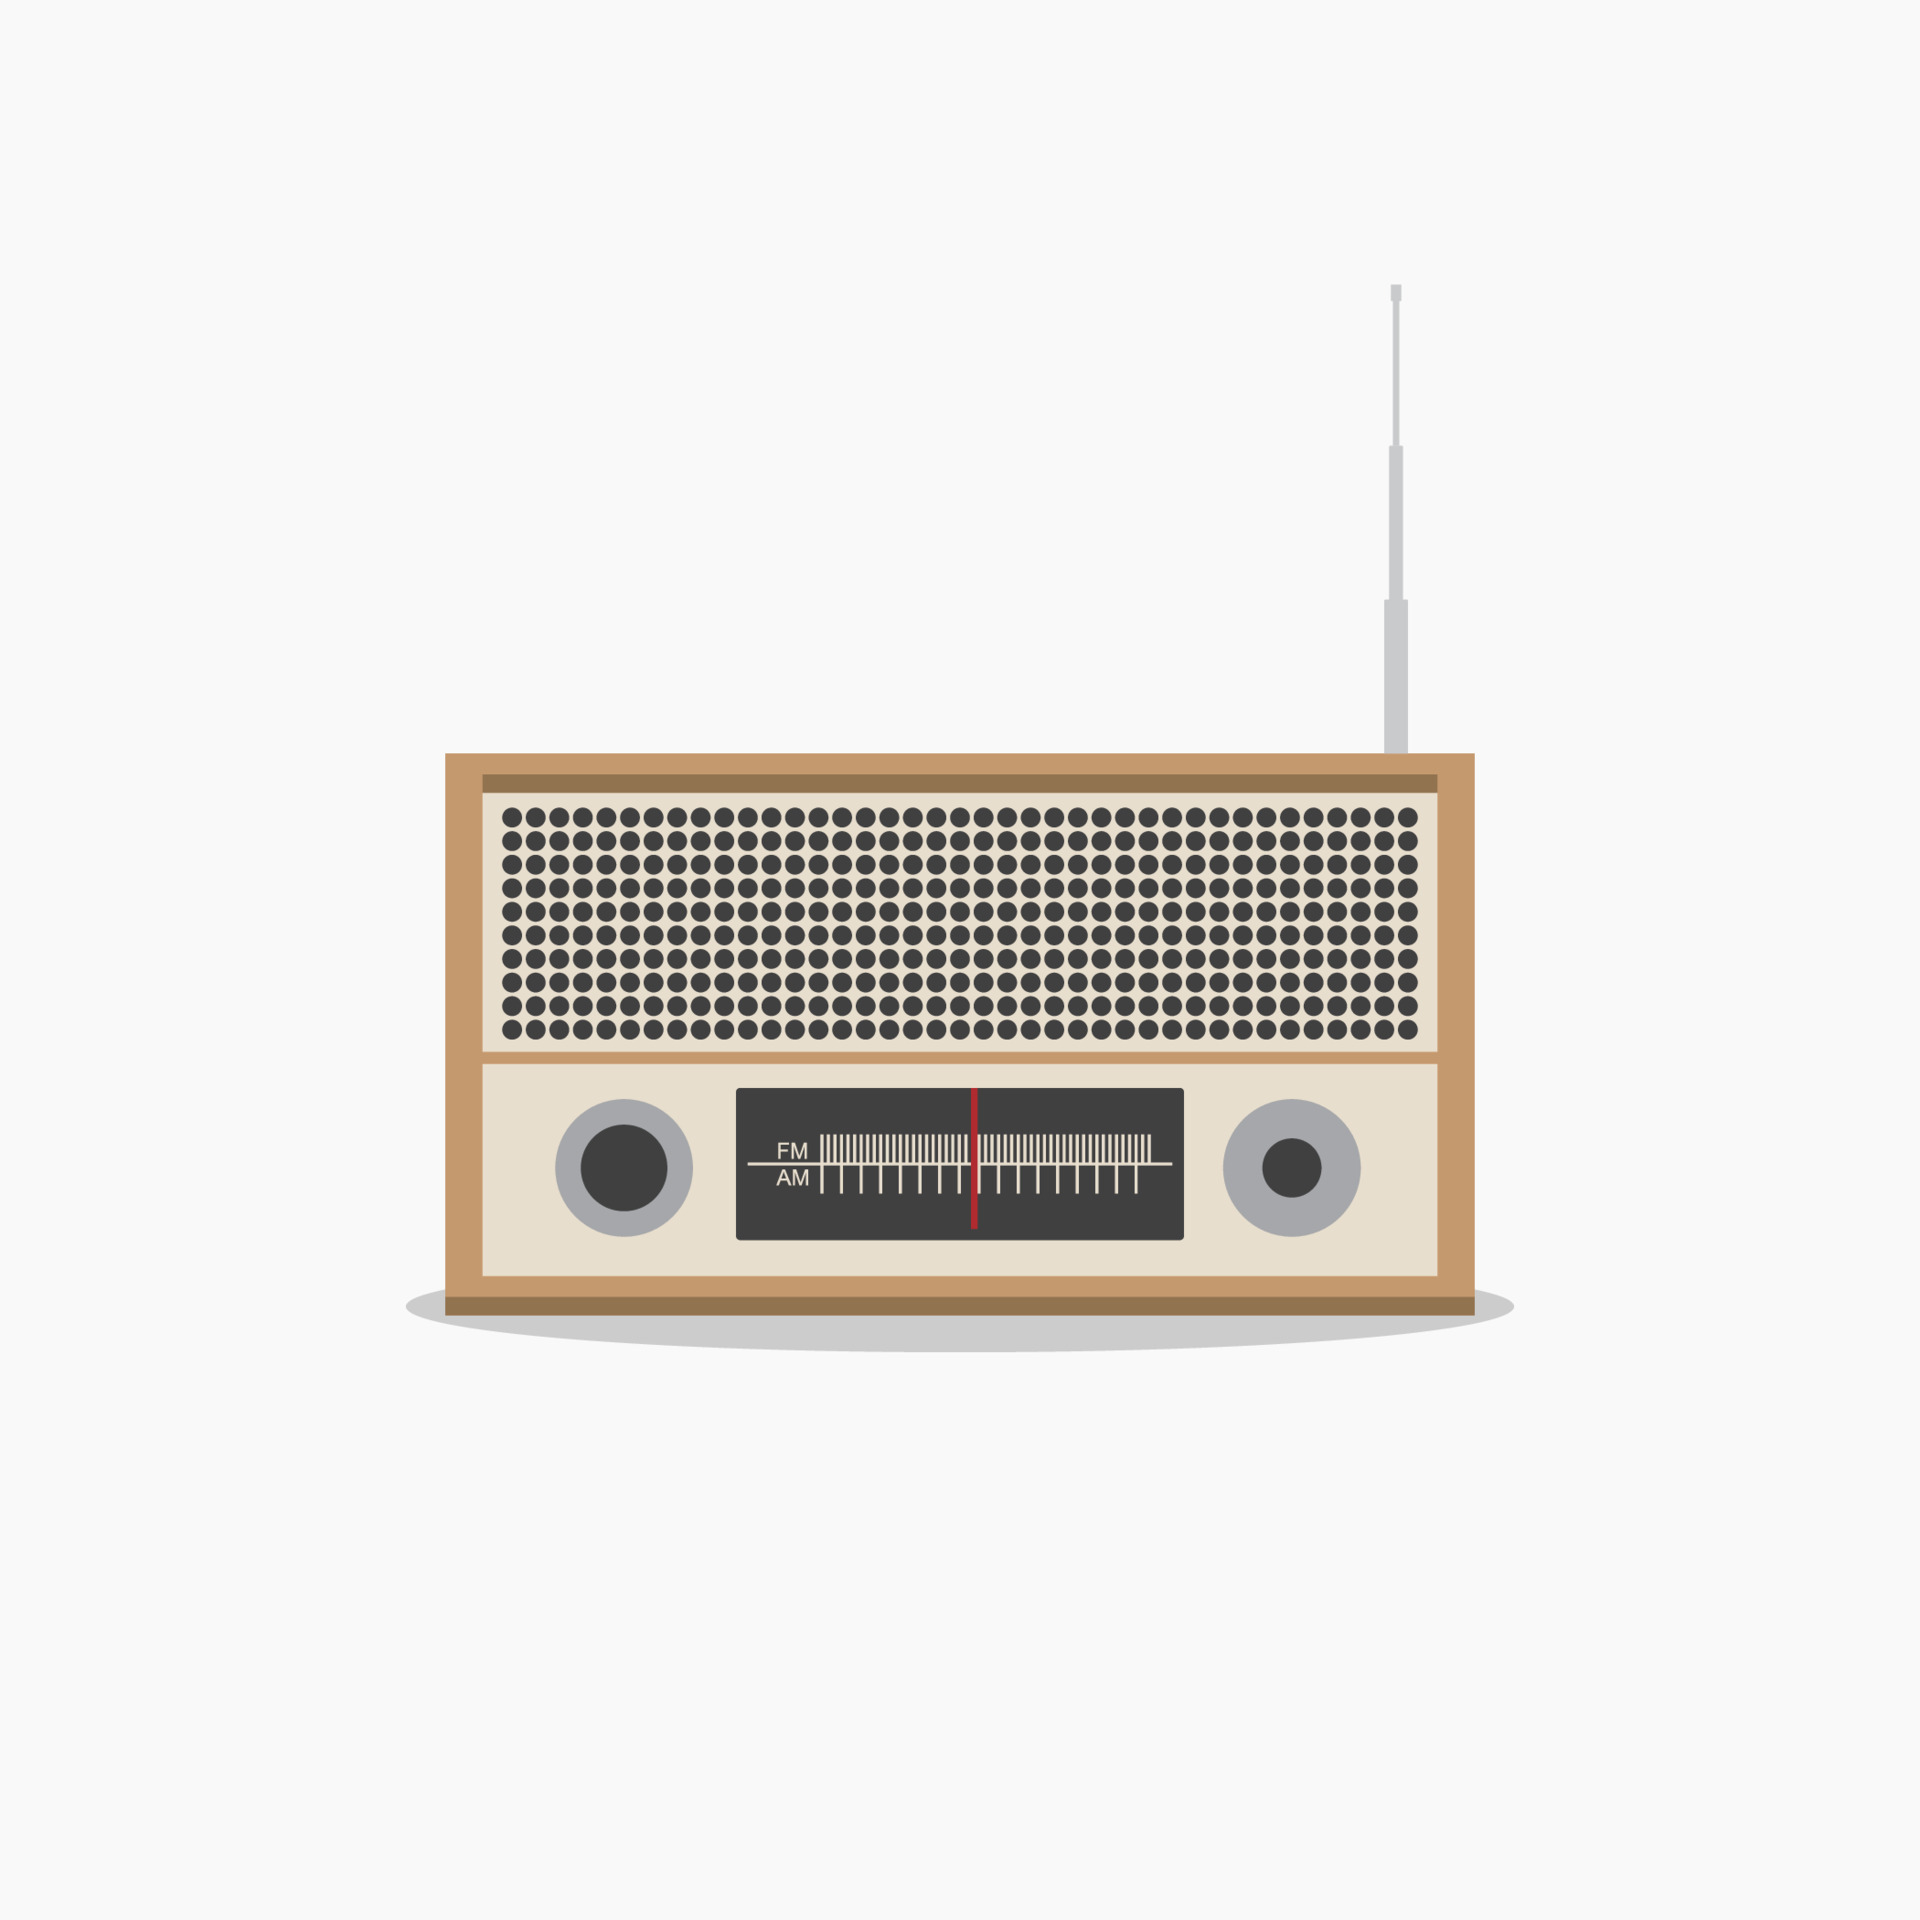 https://static.vecteezy.com/system/resources/previews/007/719/717/original/old-radio-illustration-vintage-radio-retro-radio-the-symbol-for-electronic-sound-and-music-player-vector.jpg